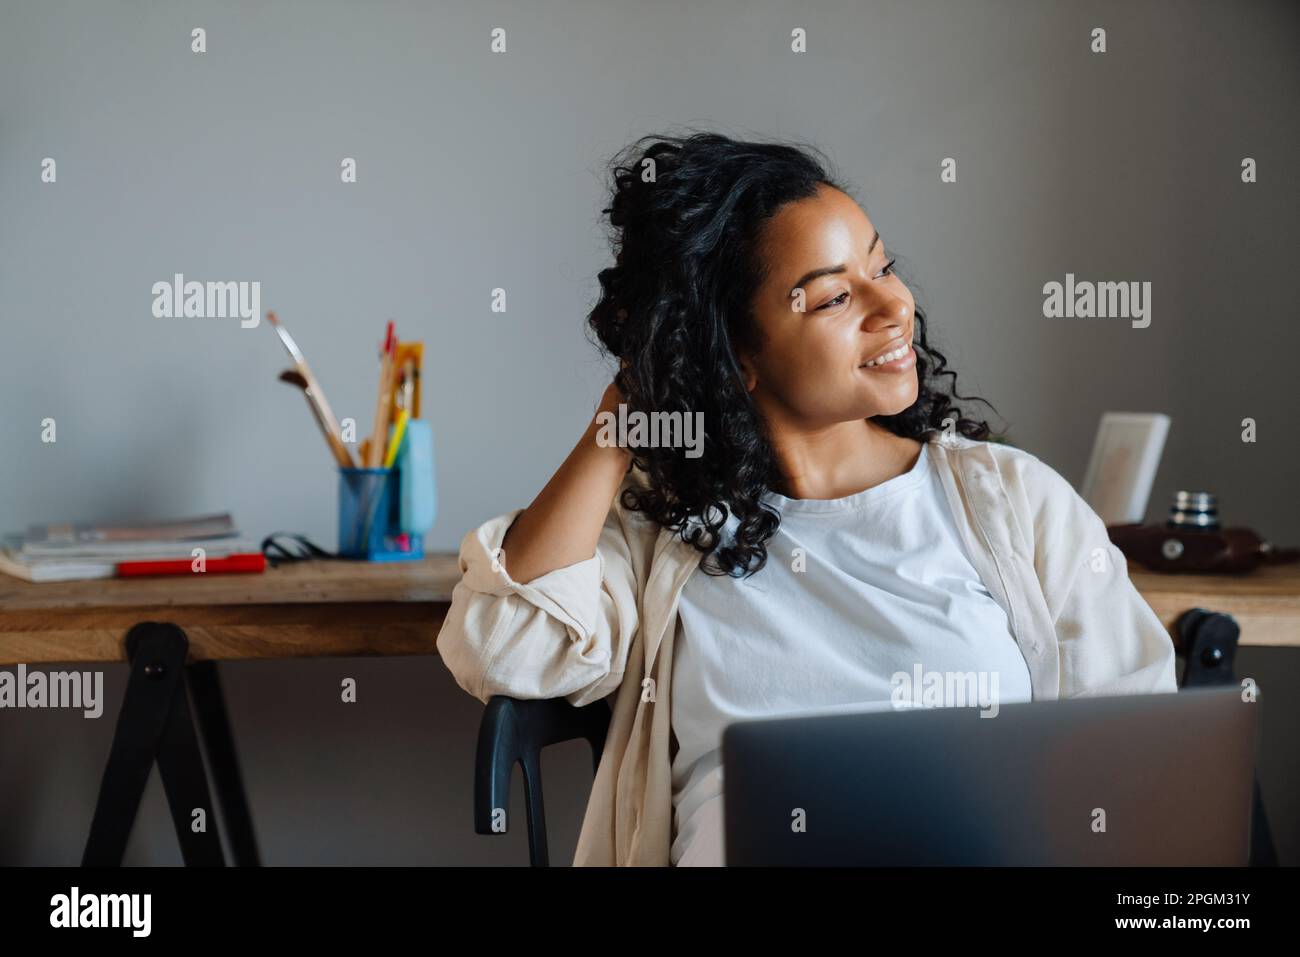 African american young woman with curly afro hairstyle sitting in chair and using laptop at home Stock Photo